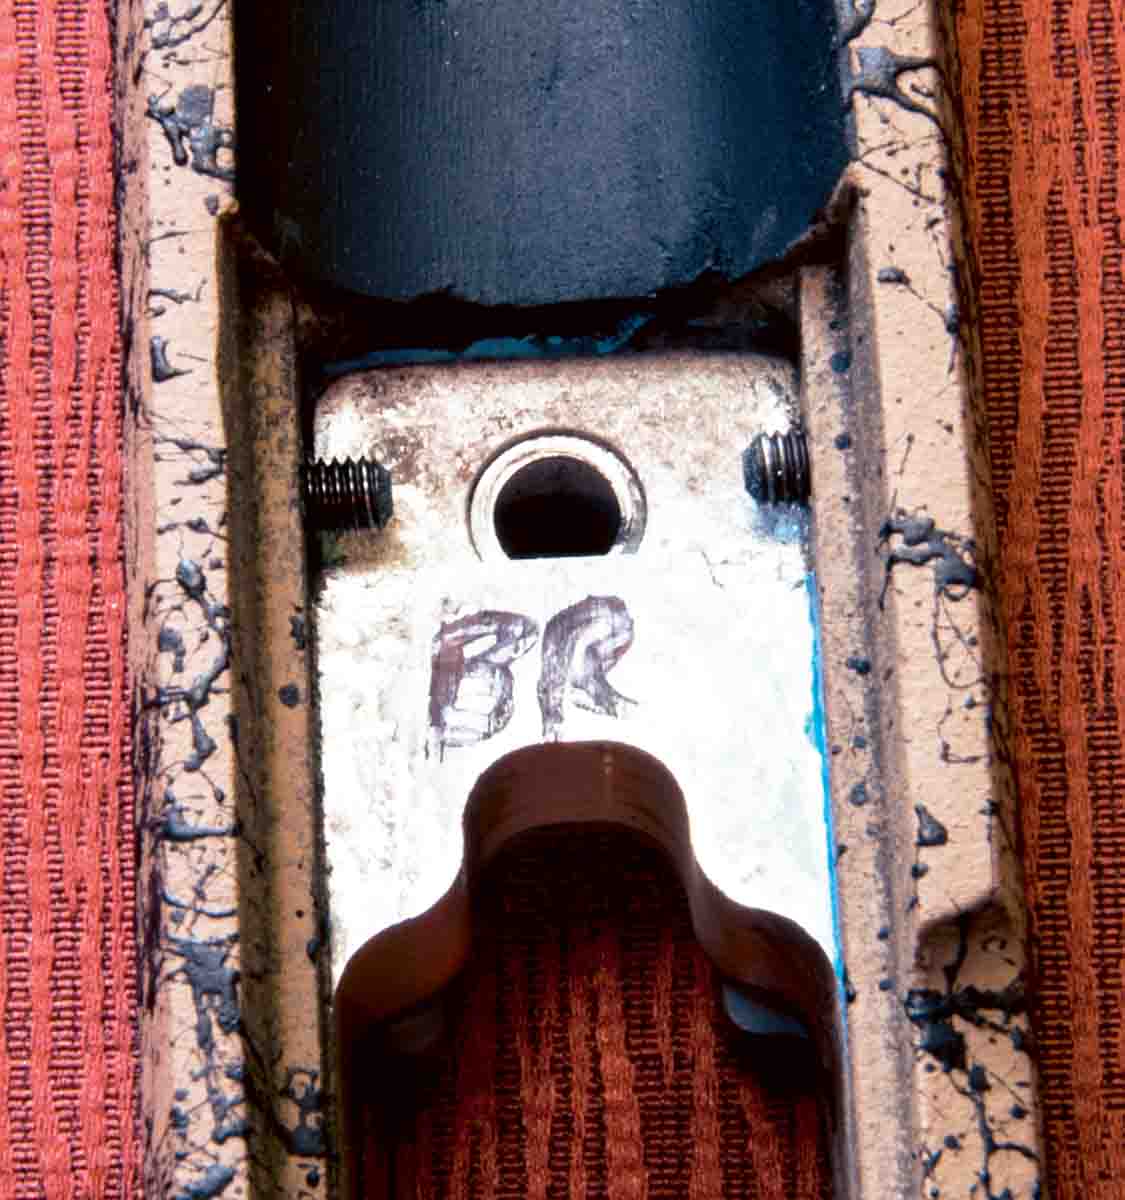 An abbreviated aluminum bedding block helps stiffen the H-S PSS stock. Note the centering screws protruding in where the recoil lug will abutt against the bedding block.